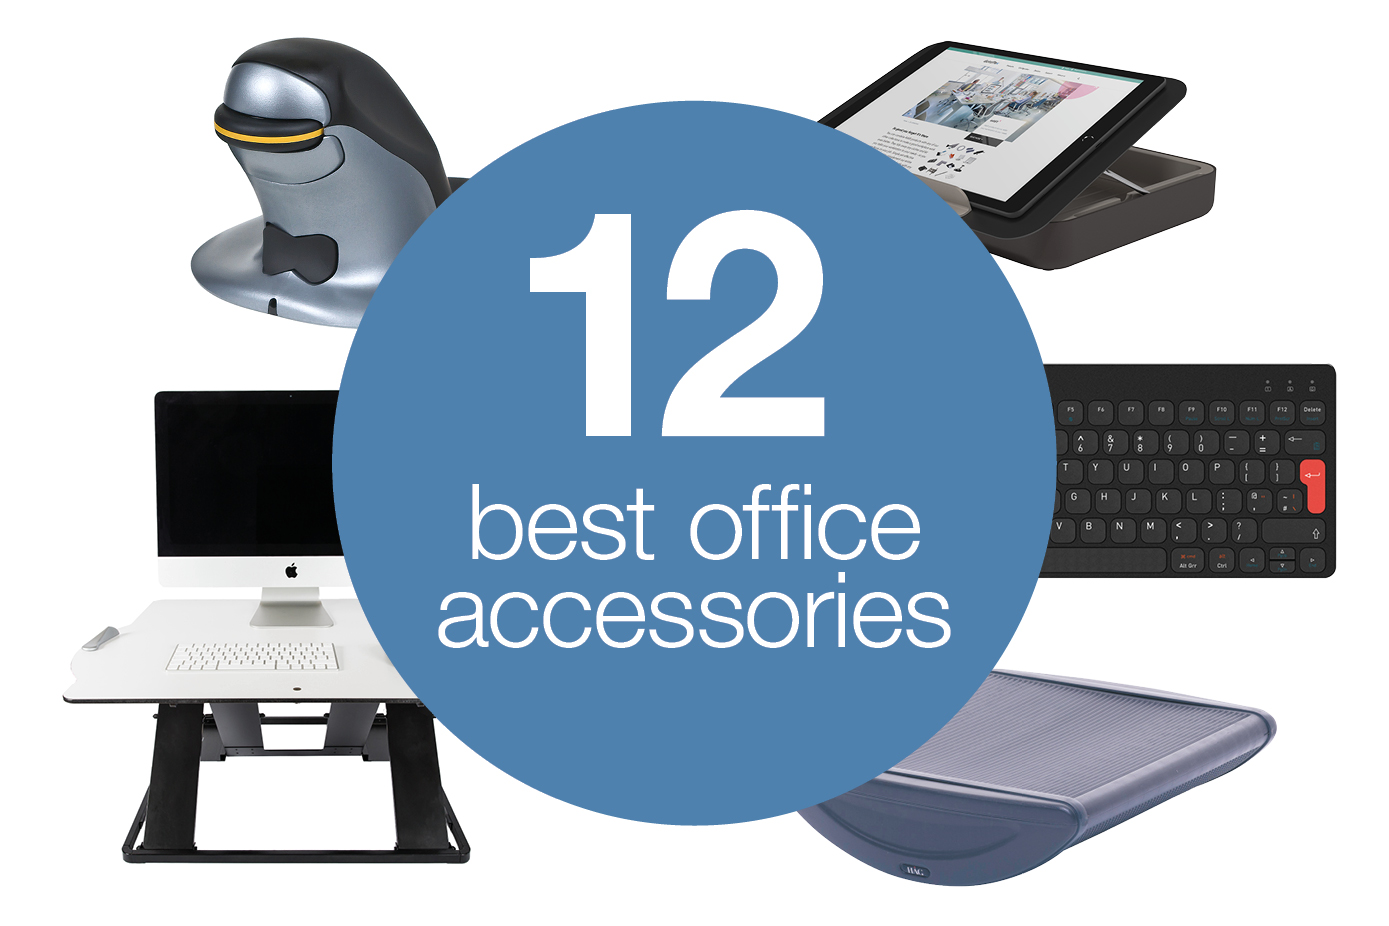 The 12 best office accessories: how many do you have?